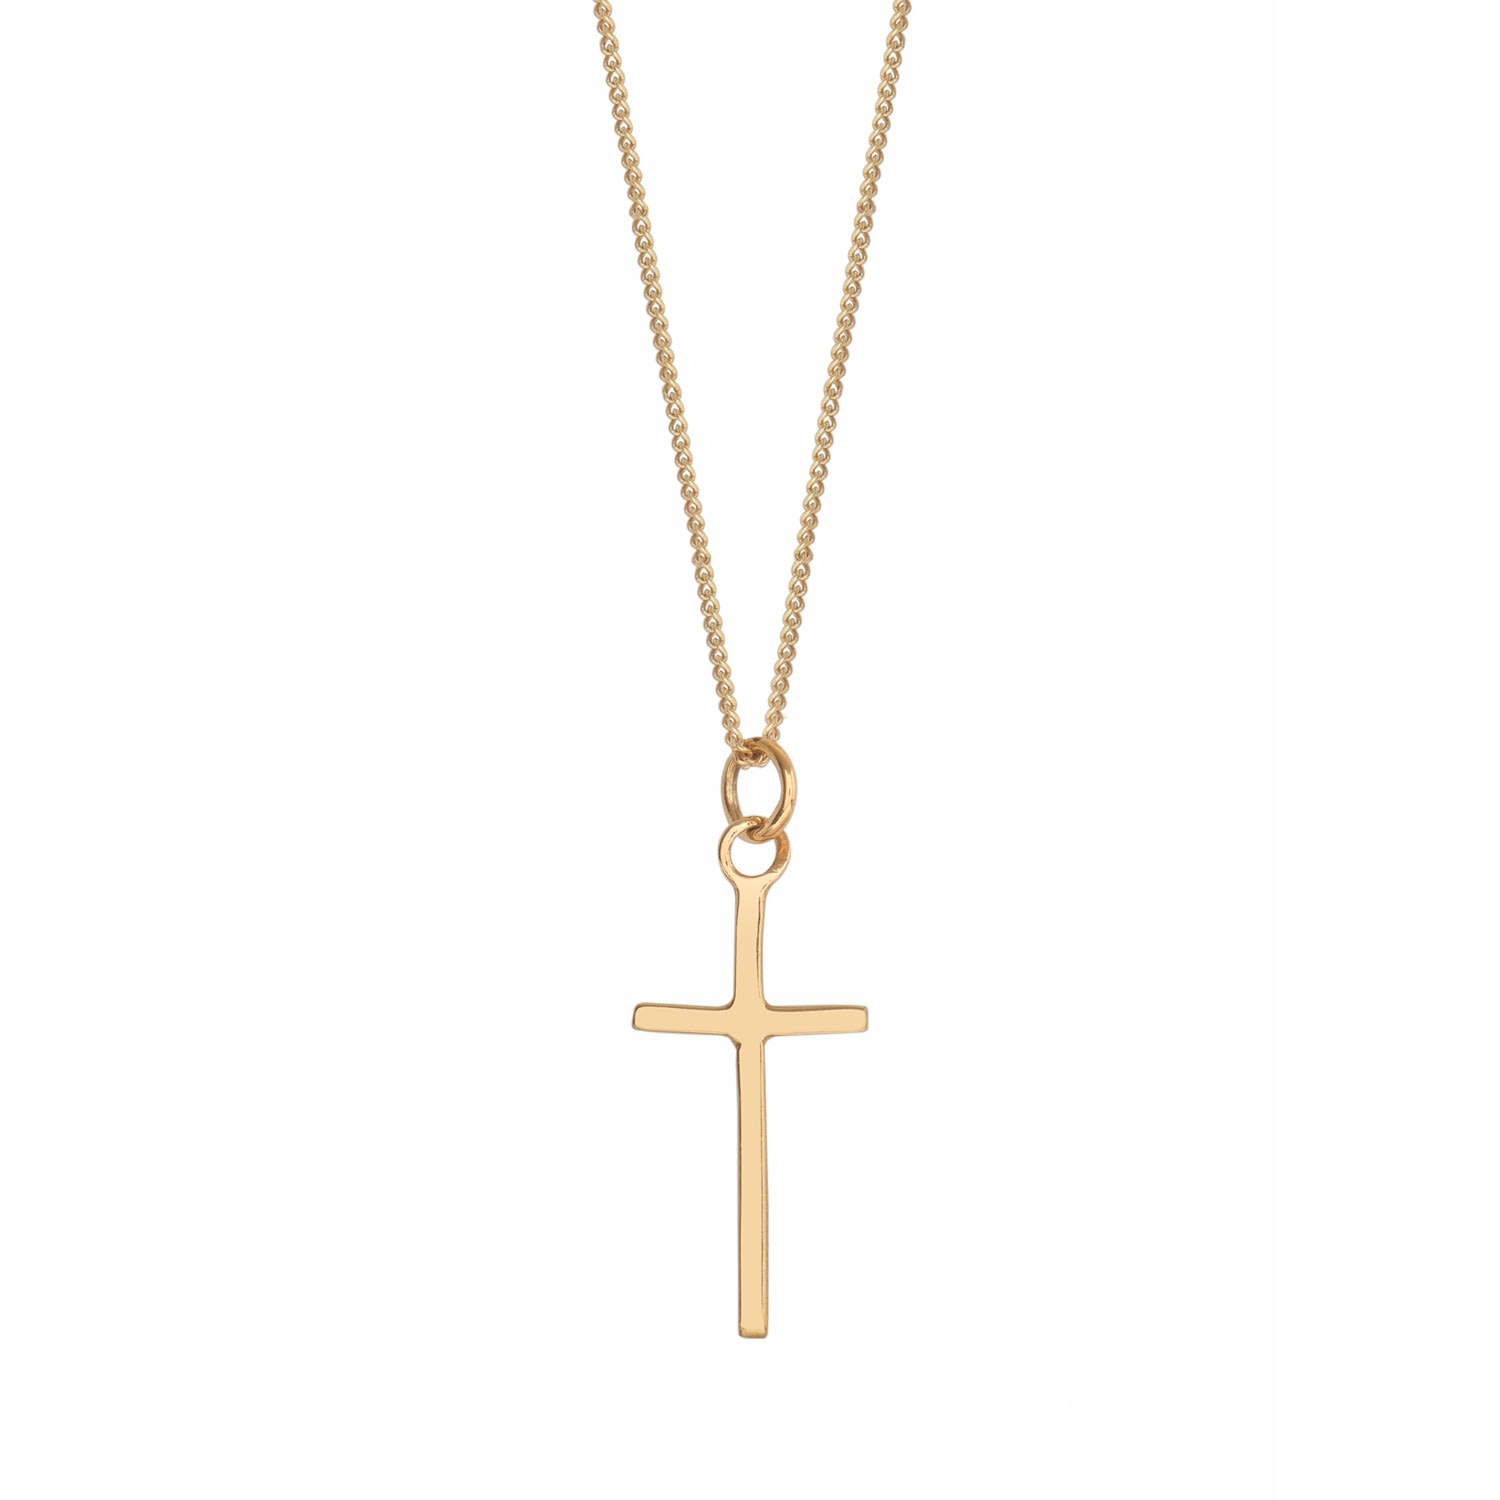 Lime Tree Design Women's Cross Pendant Necklace 14ct Solid Gold